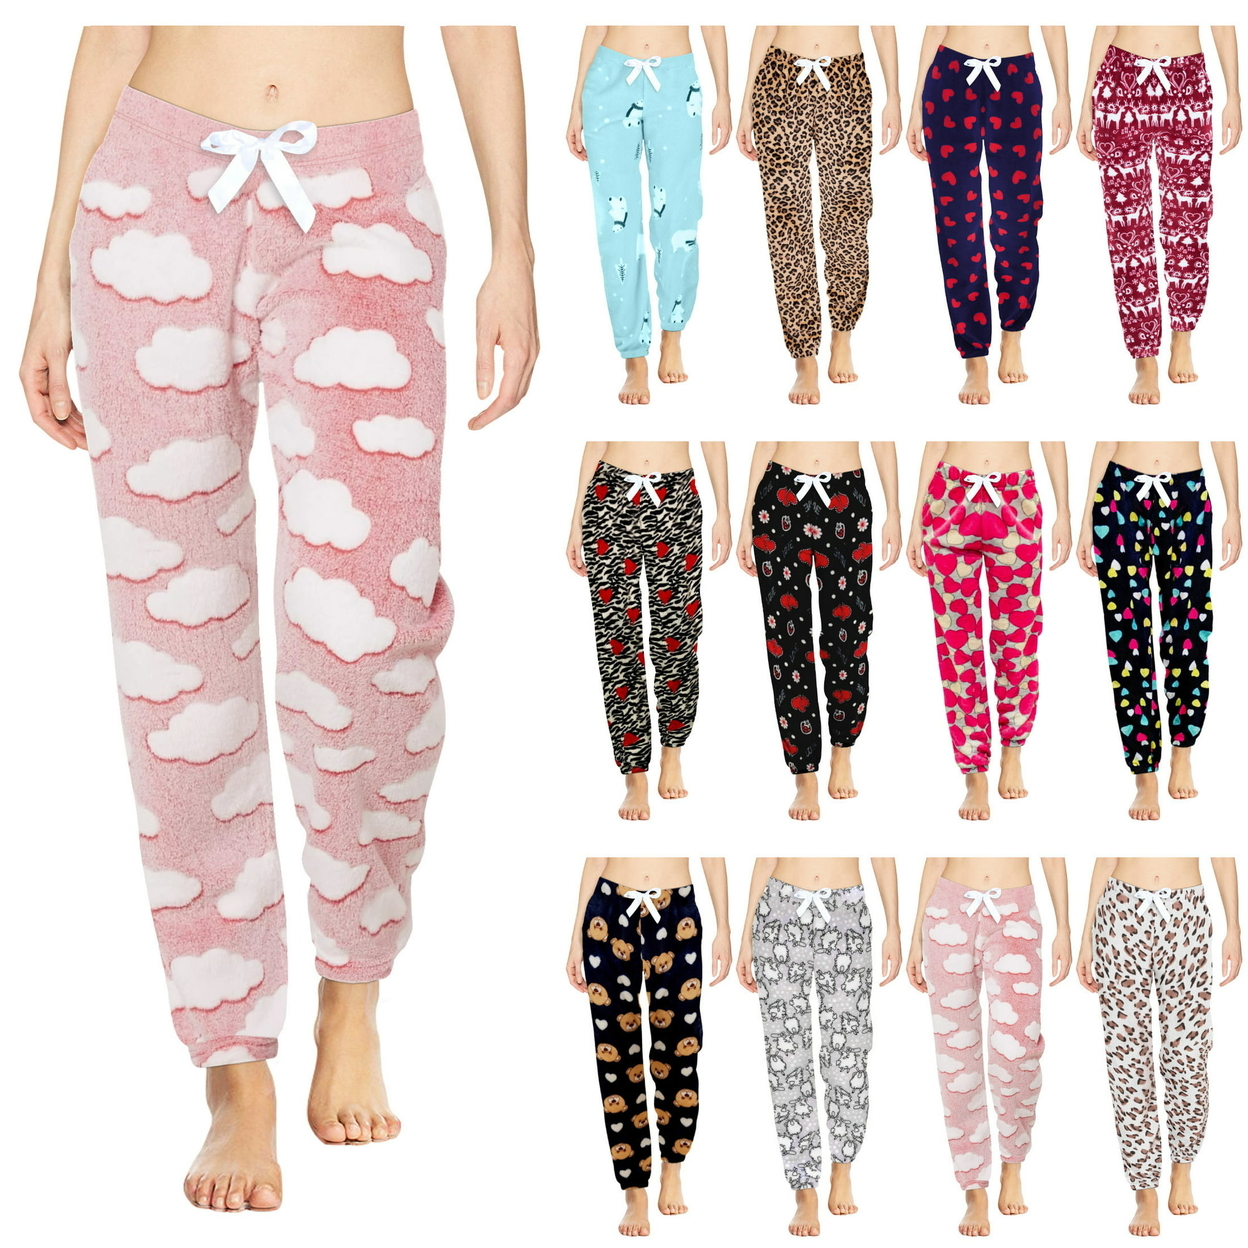 4-Pack: Women's Solid & Printed Ultra-Soft Comfy Stretch Micro-Fleece Pajama Lounge Pants - Large, Animal